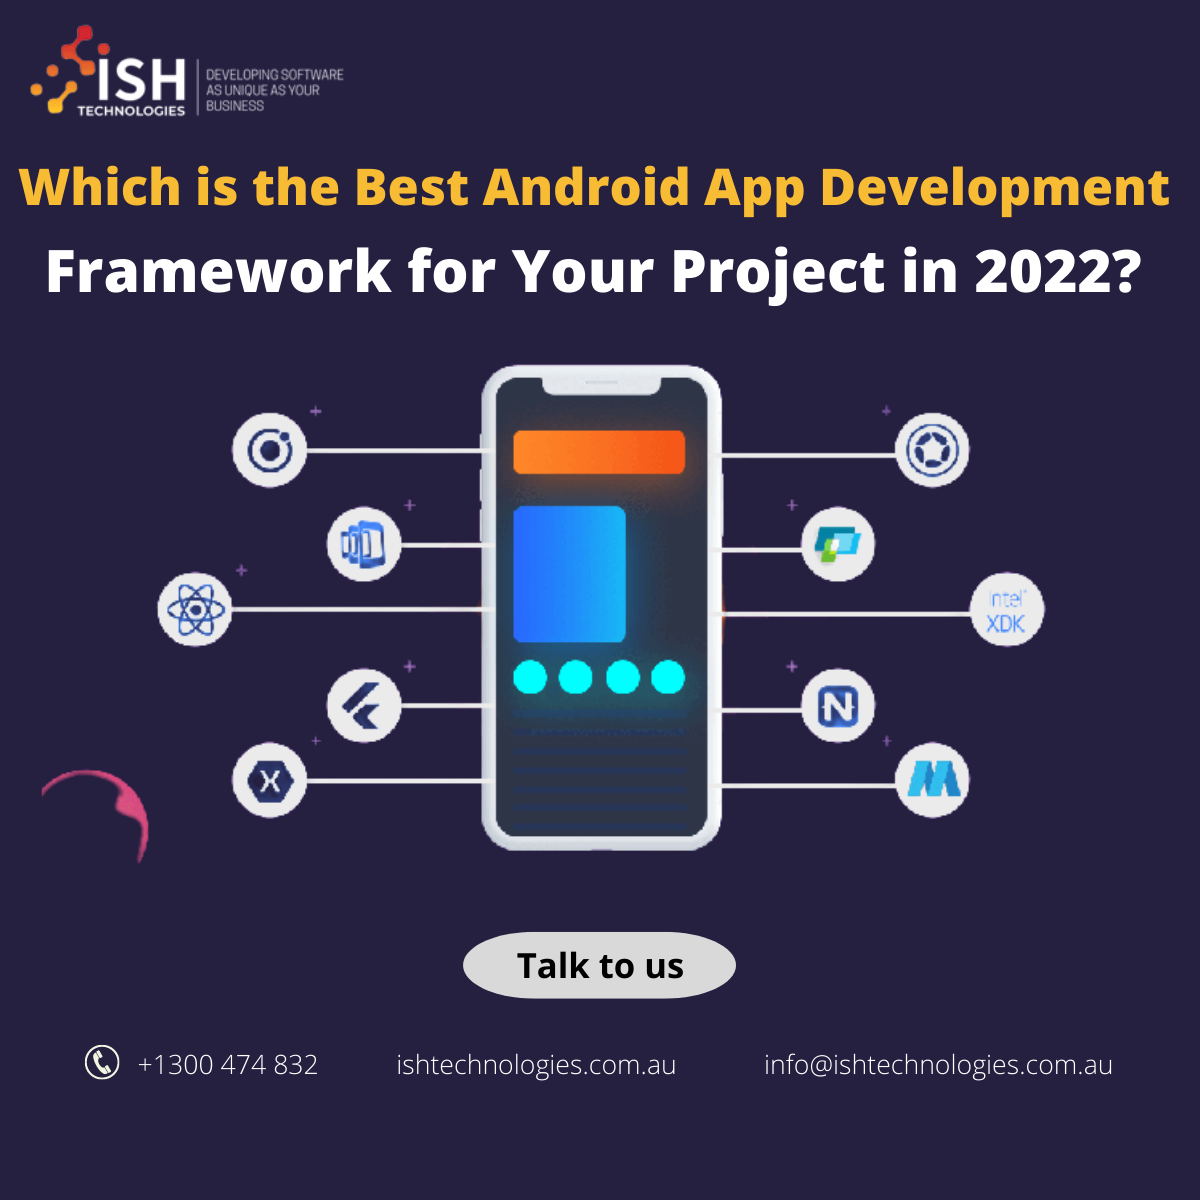 Which-is-the-best-android-app-development-framework-for-your-project-in-2022?